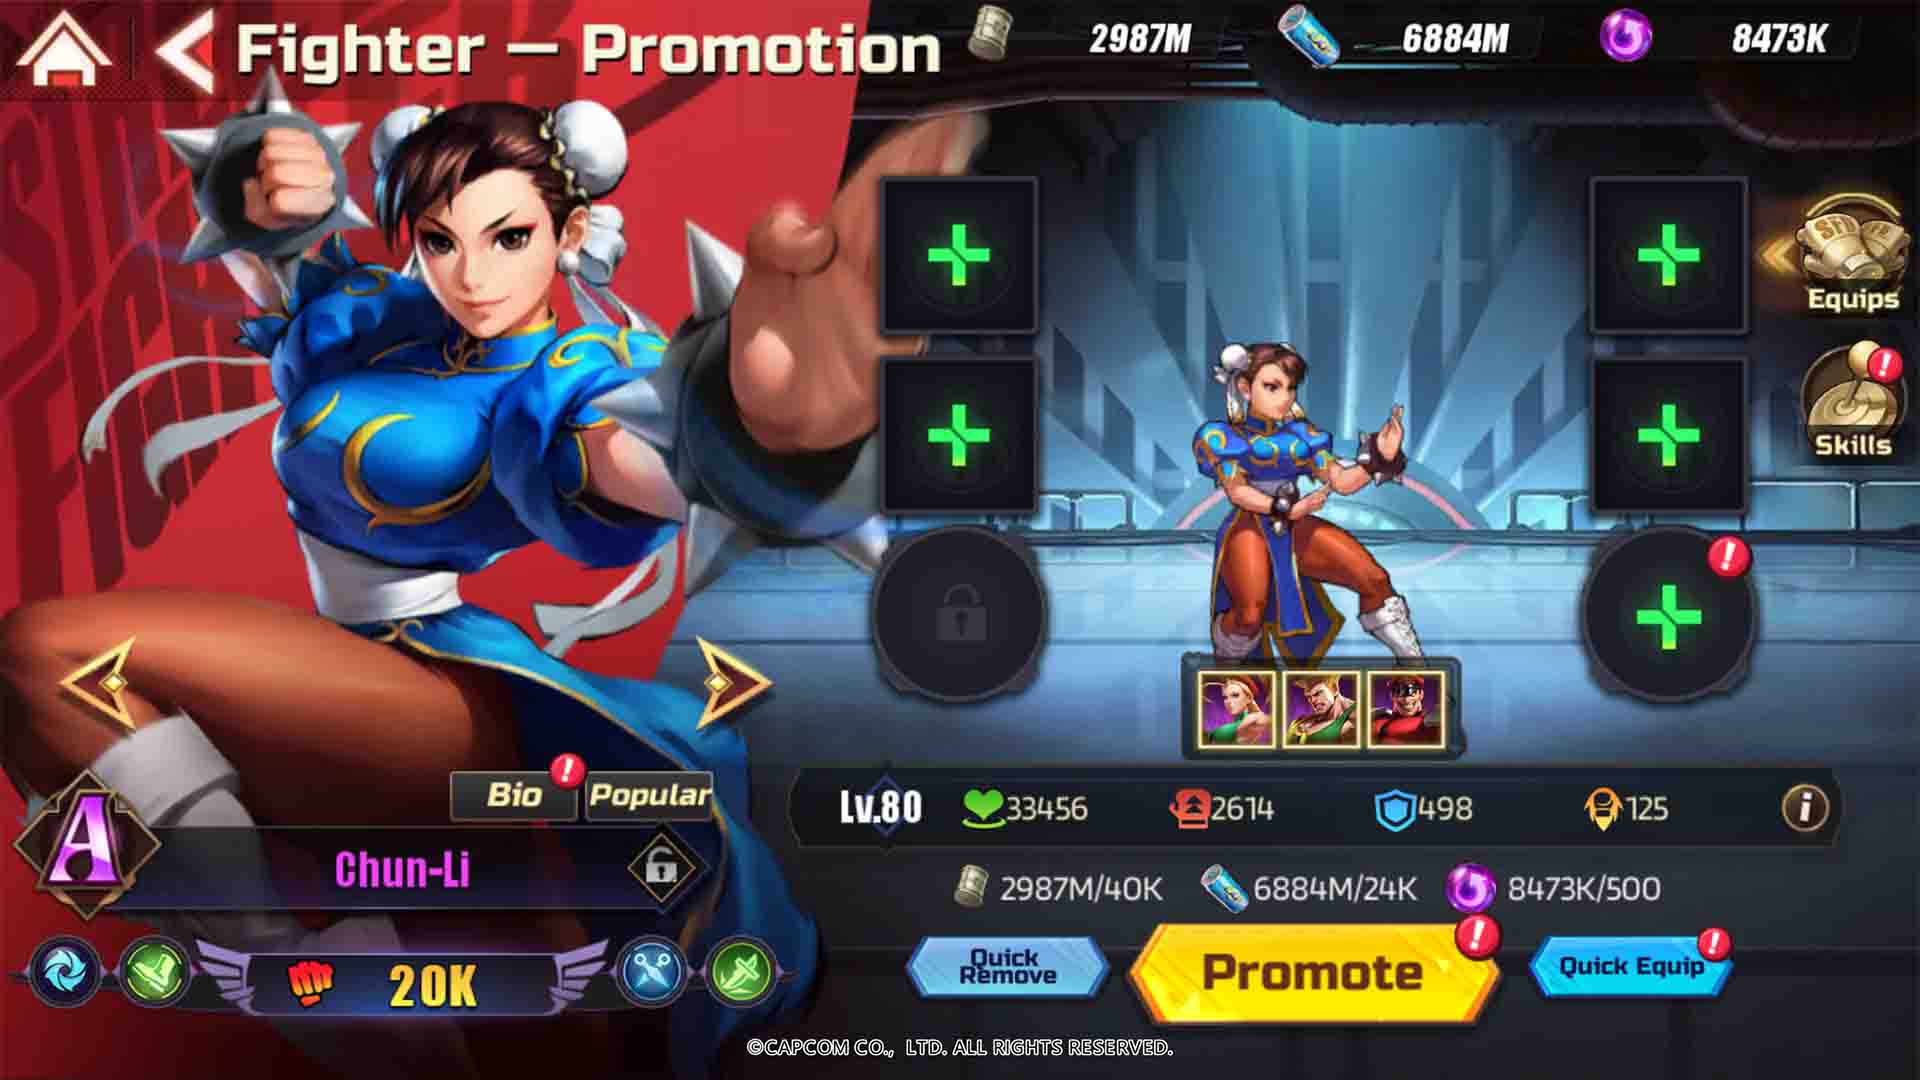 Street Fighter Mobile Game To Be Announced This Weekend